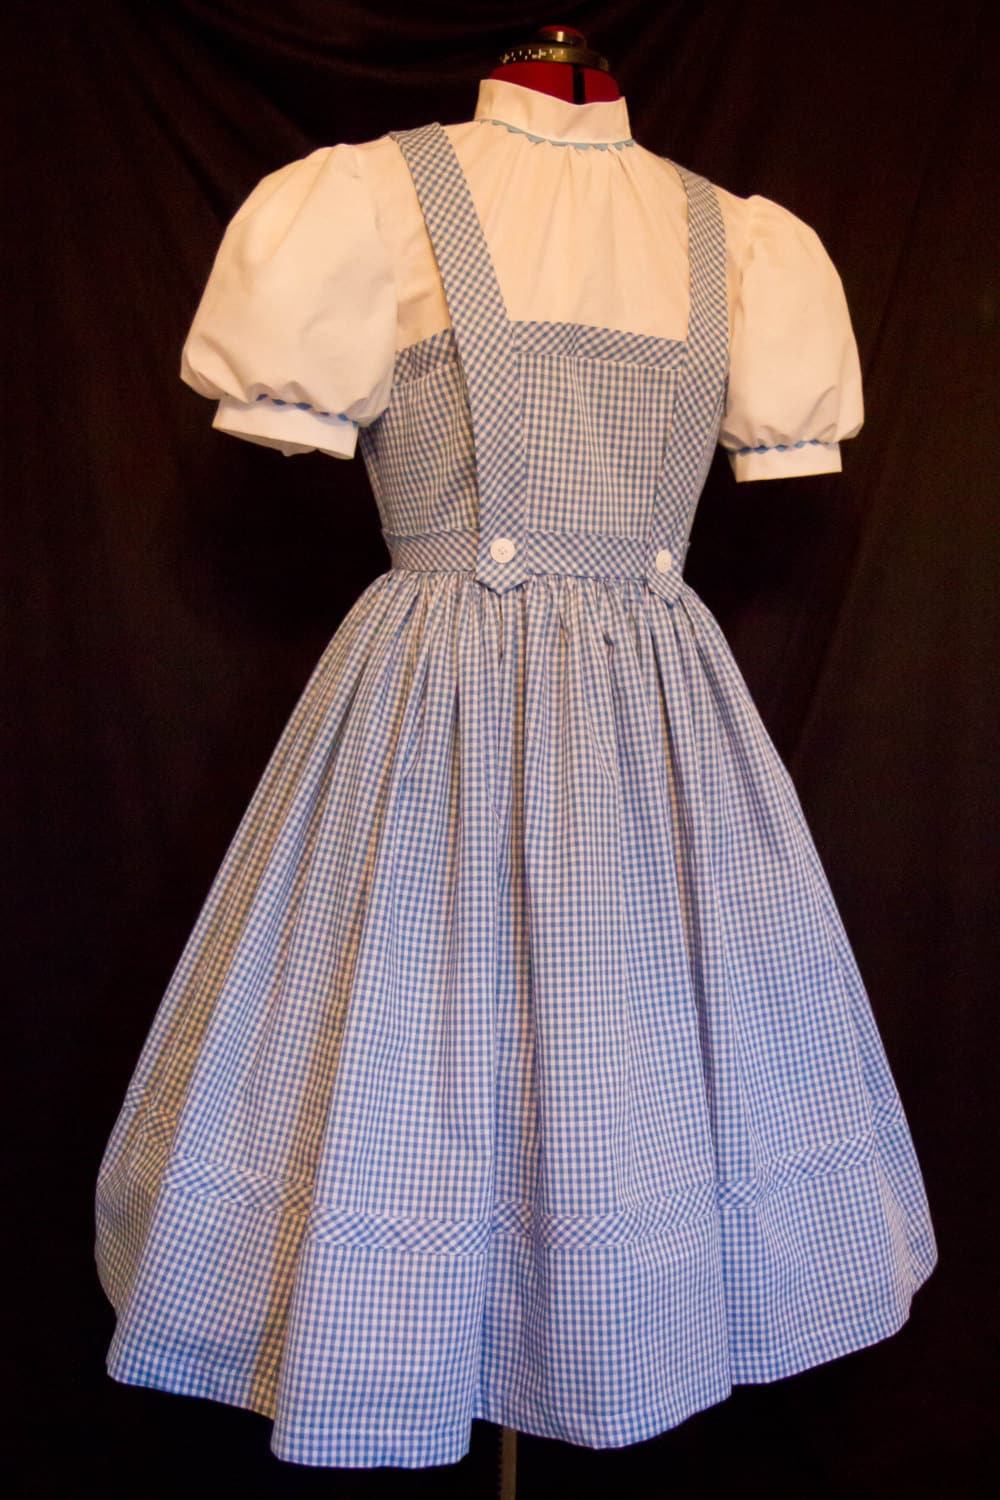 ADULT Size AUTHENTIC Reproduction DOROTHY Costume Dress